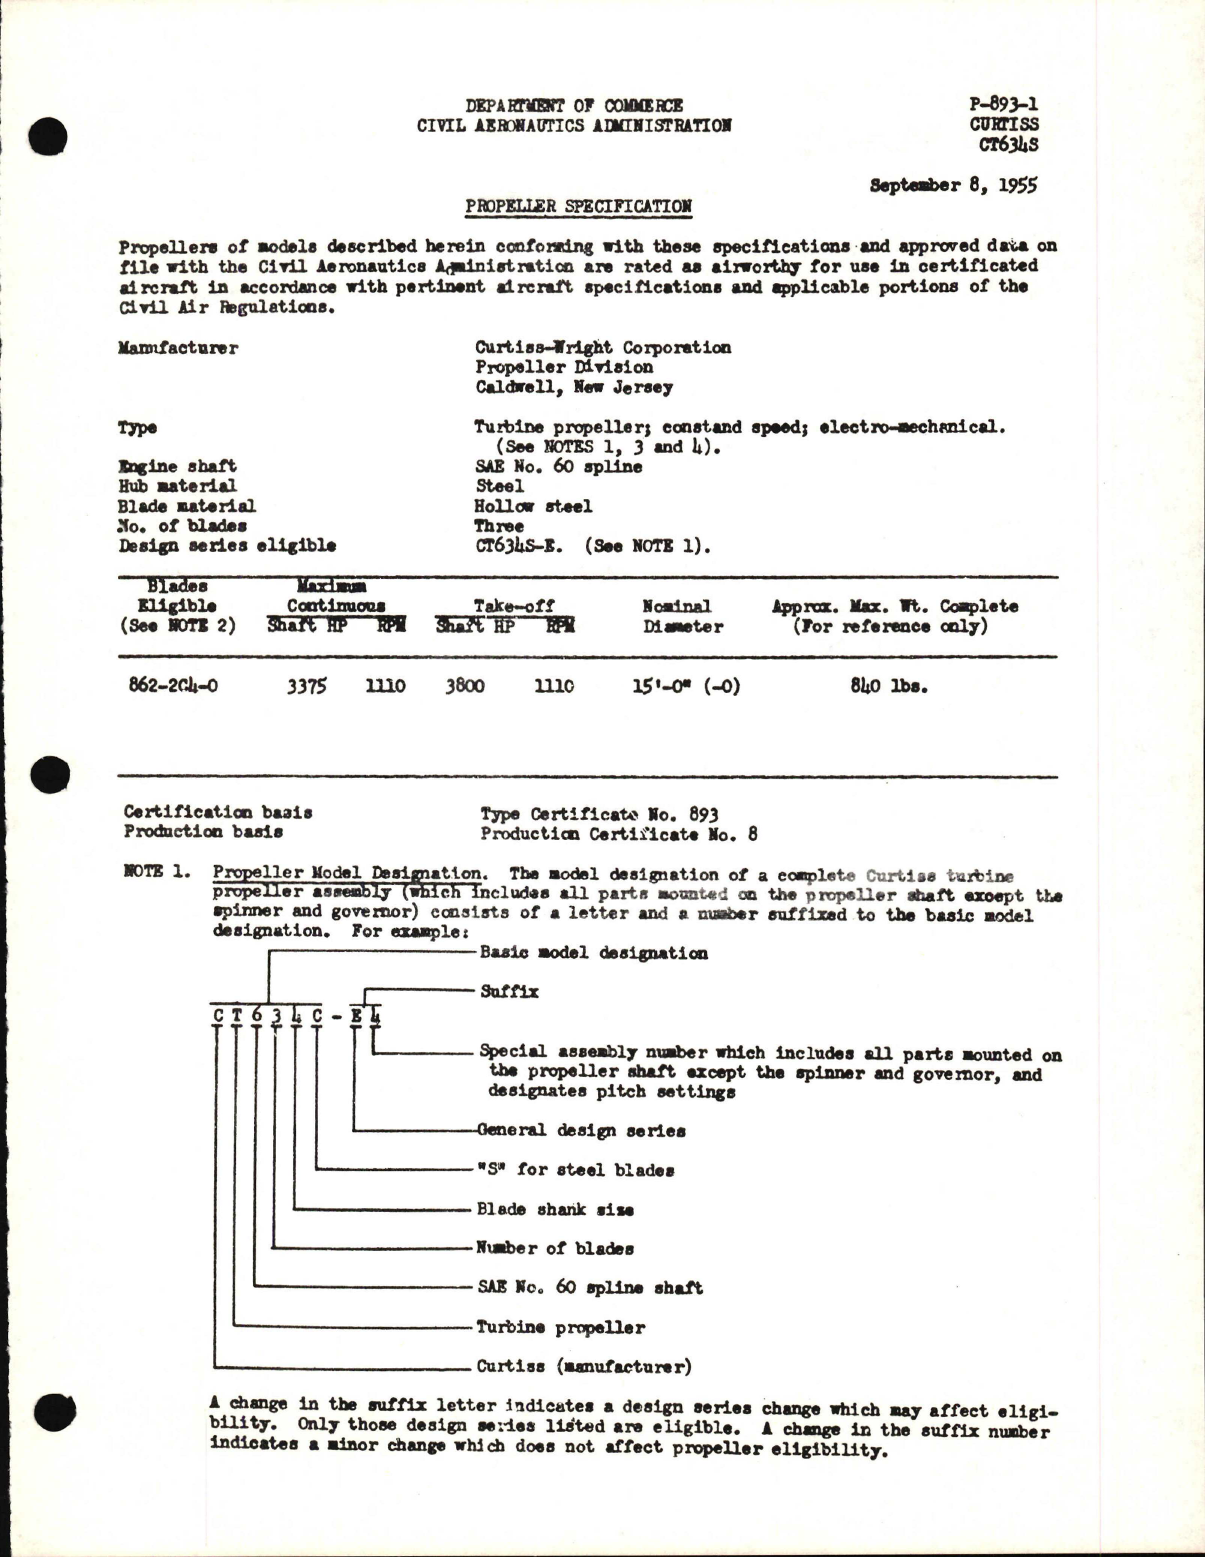 Sample page 1 from AirCorps Library document: CT634S